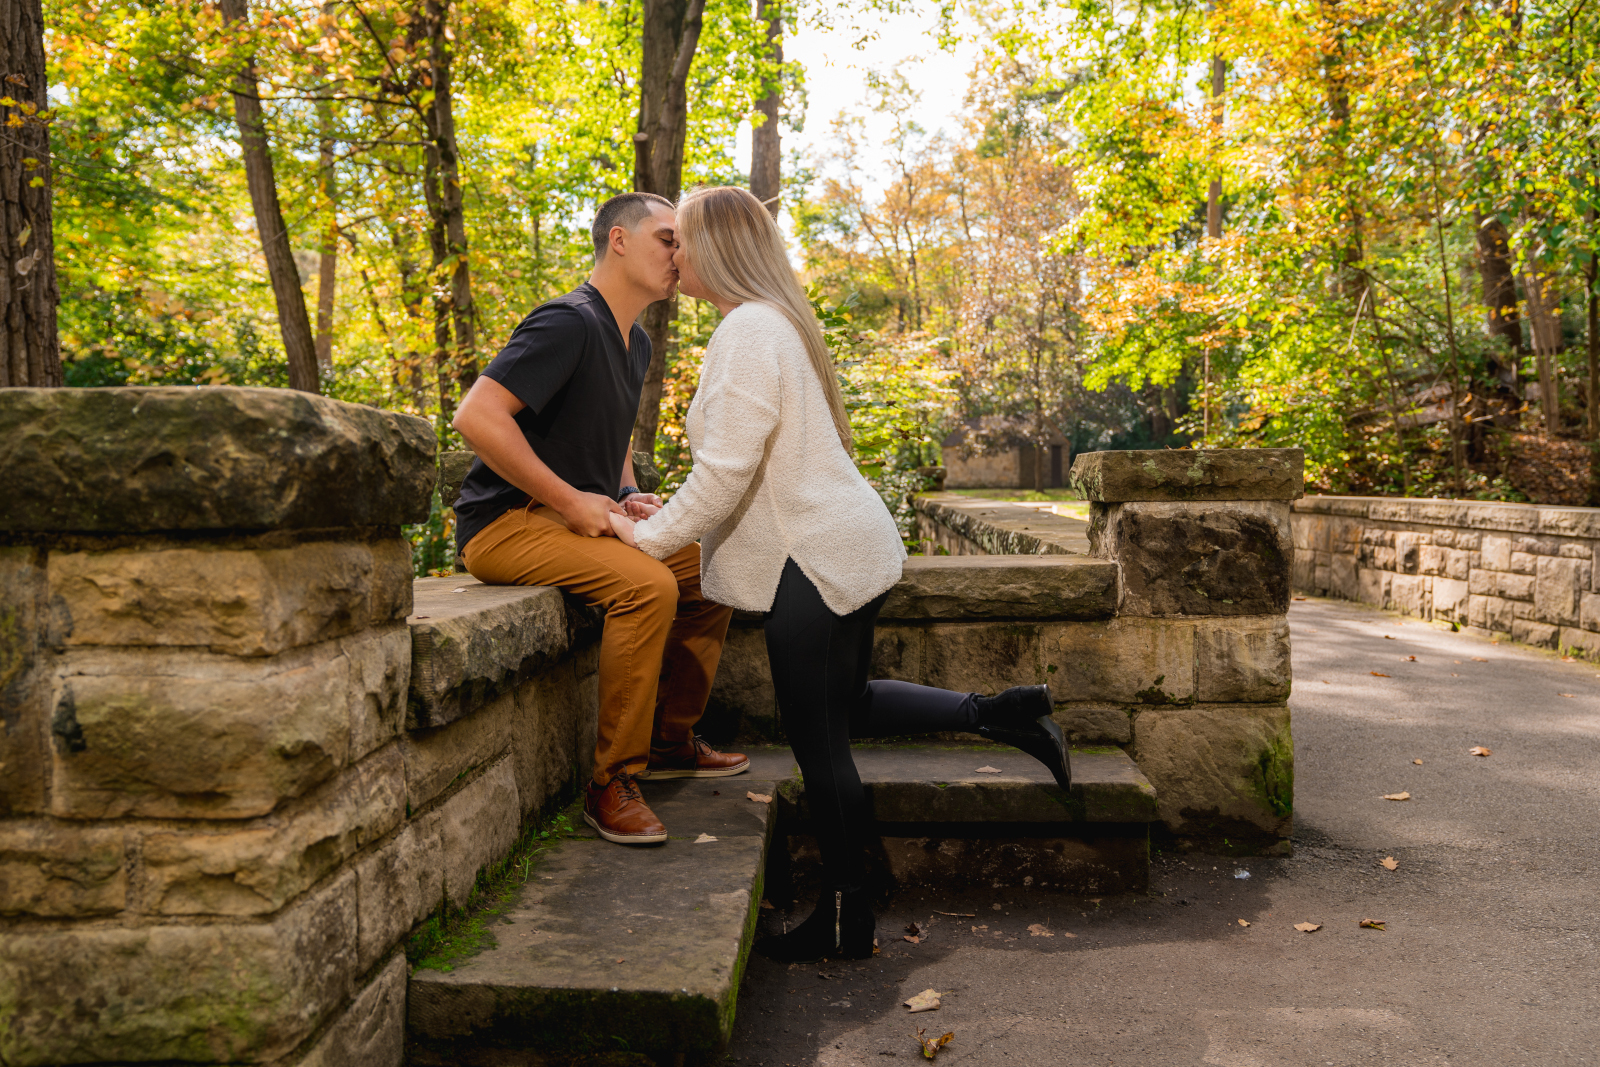 Man and woman fiancee engagement photo, couple portrait, kiss, bench, stone, fall leaves, fall colors, trees, nature, outdoor fall engagement photo session at Grand Pacific Junction Historic Shopping District